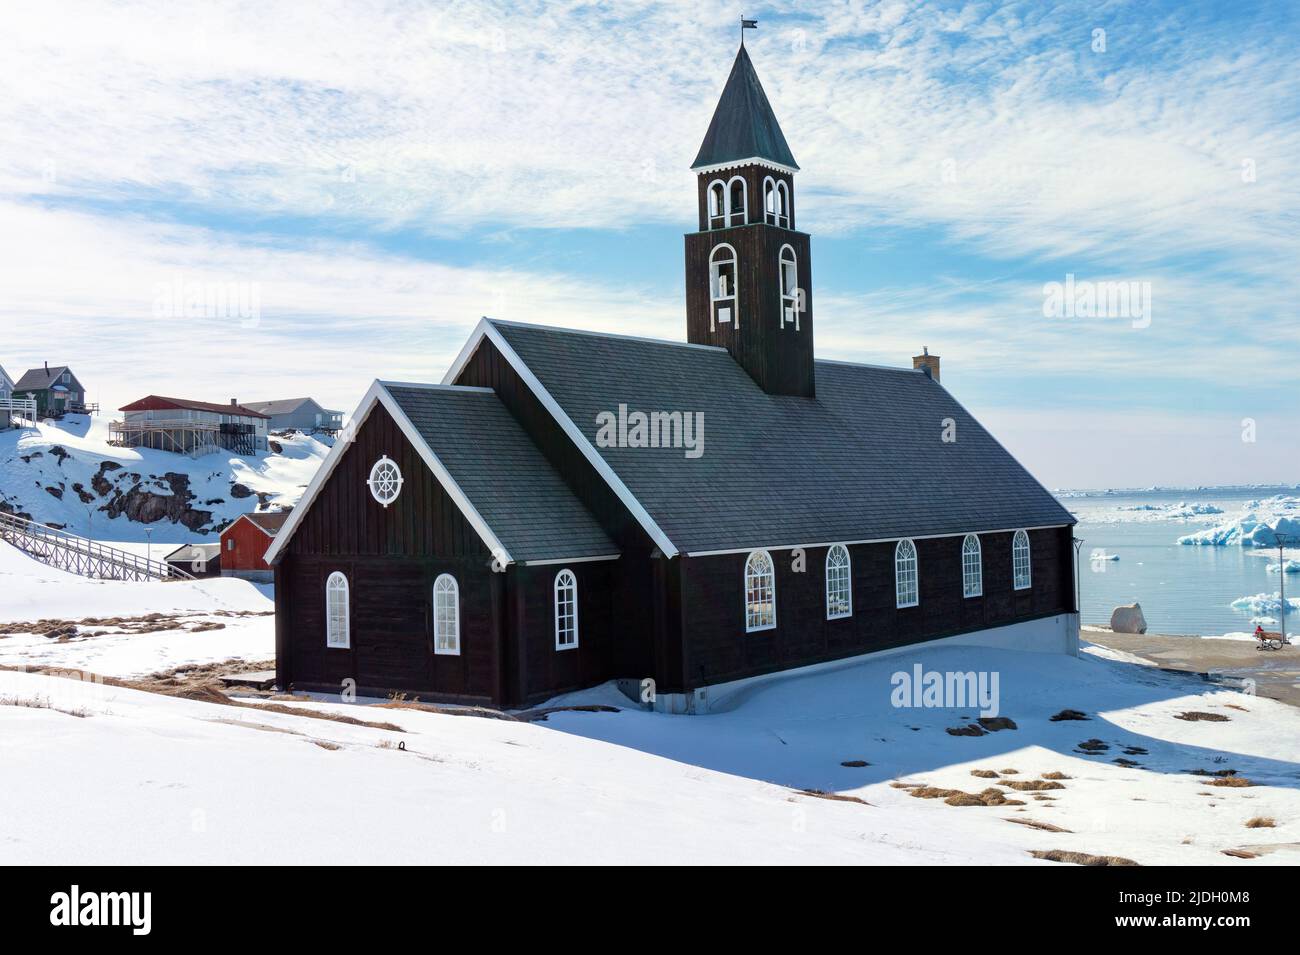 Zion church in Ilulissat Greenland with sunny snowy landscape Stock Photo